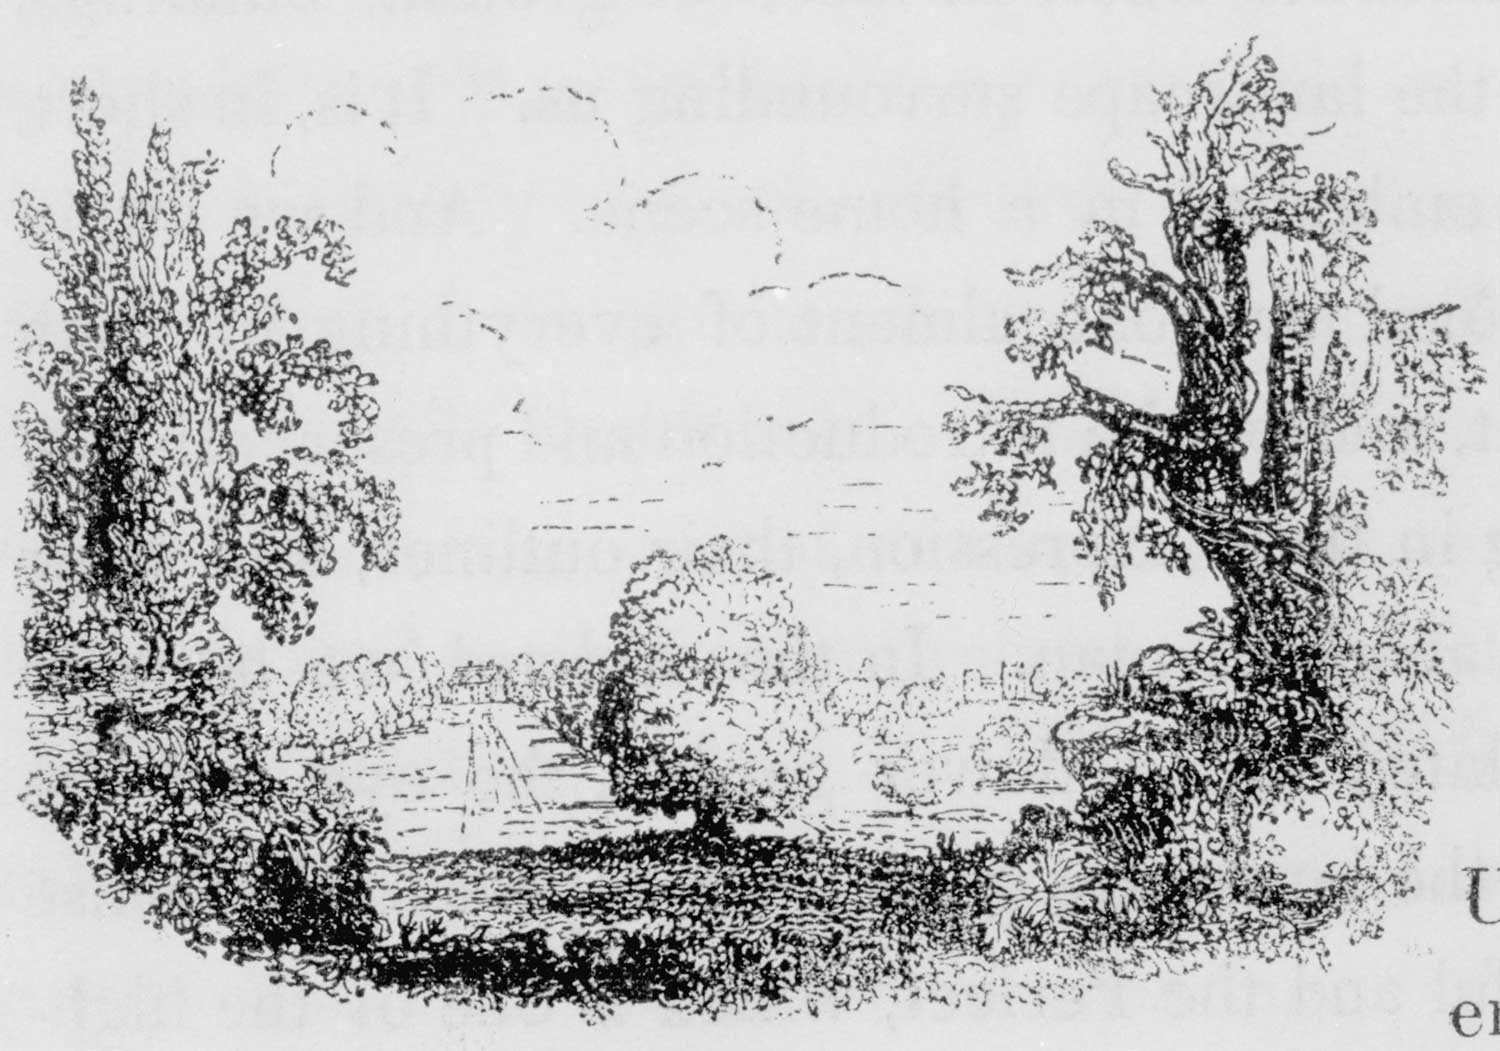 Anonymous, Vignette of contrasting garden styles, in A. J. Downing, A Treatise on the Theory and Practice of Landscape Gardening (1849), p. 17.